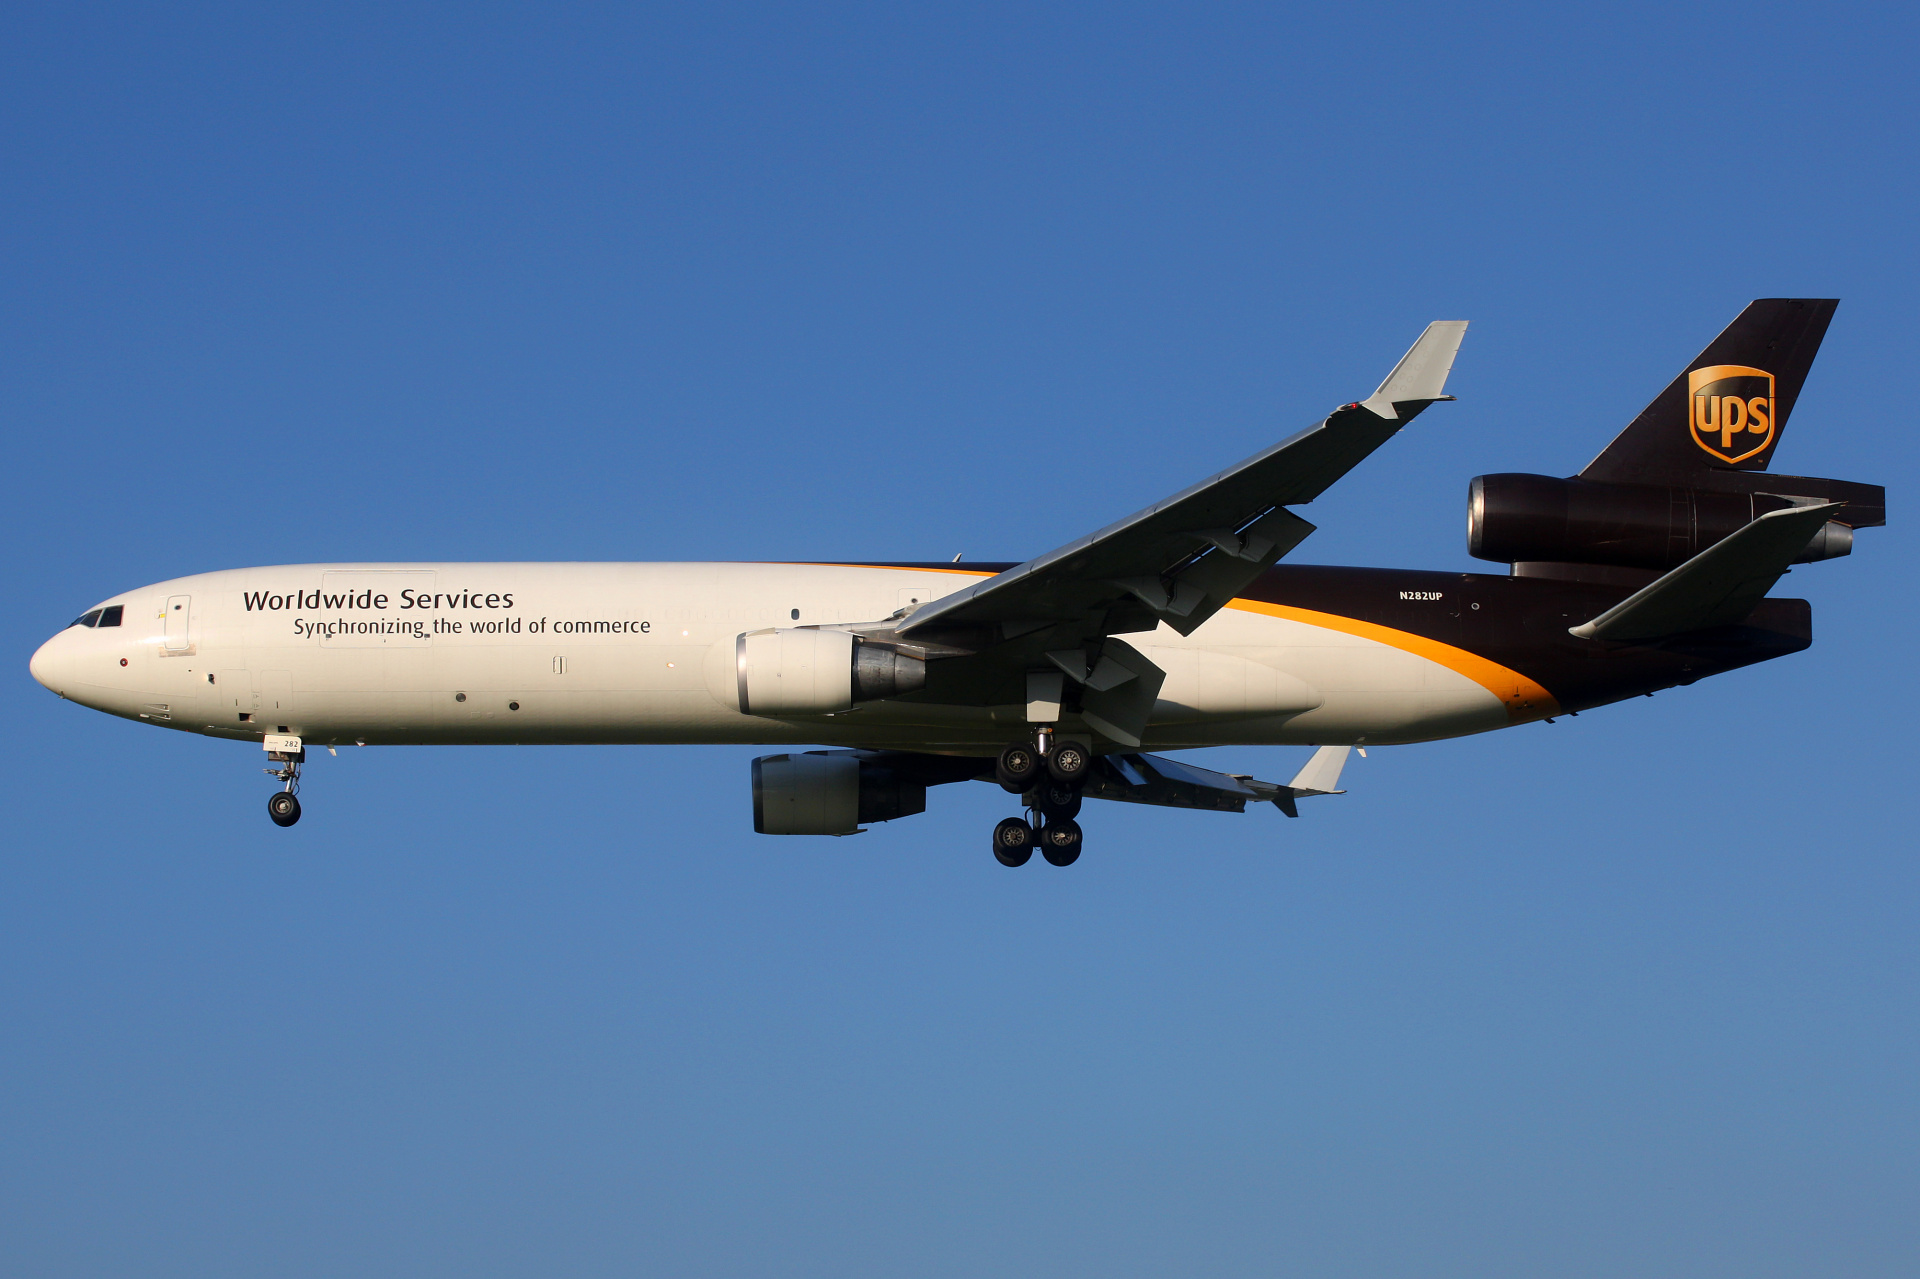 N282UP, United Parcel Service (UPS) Airlines (Aircraft » EPWA Spotting » McDonnell Douglas MD-11F)